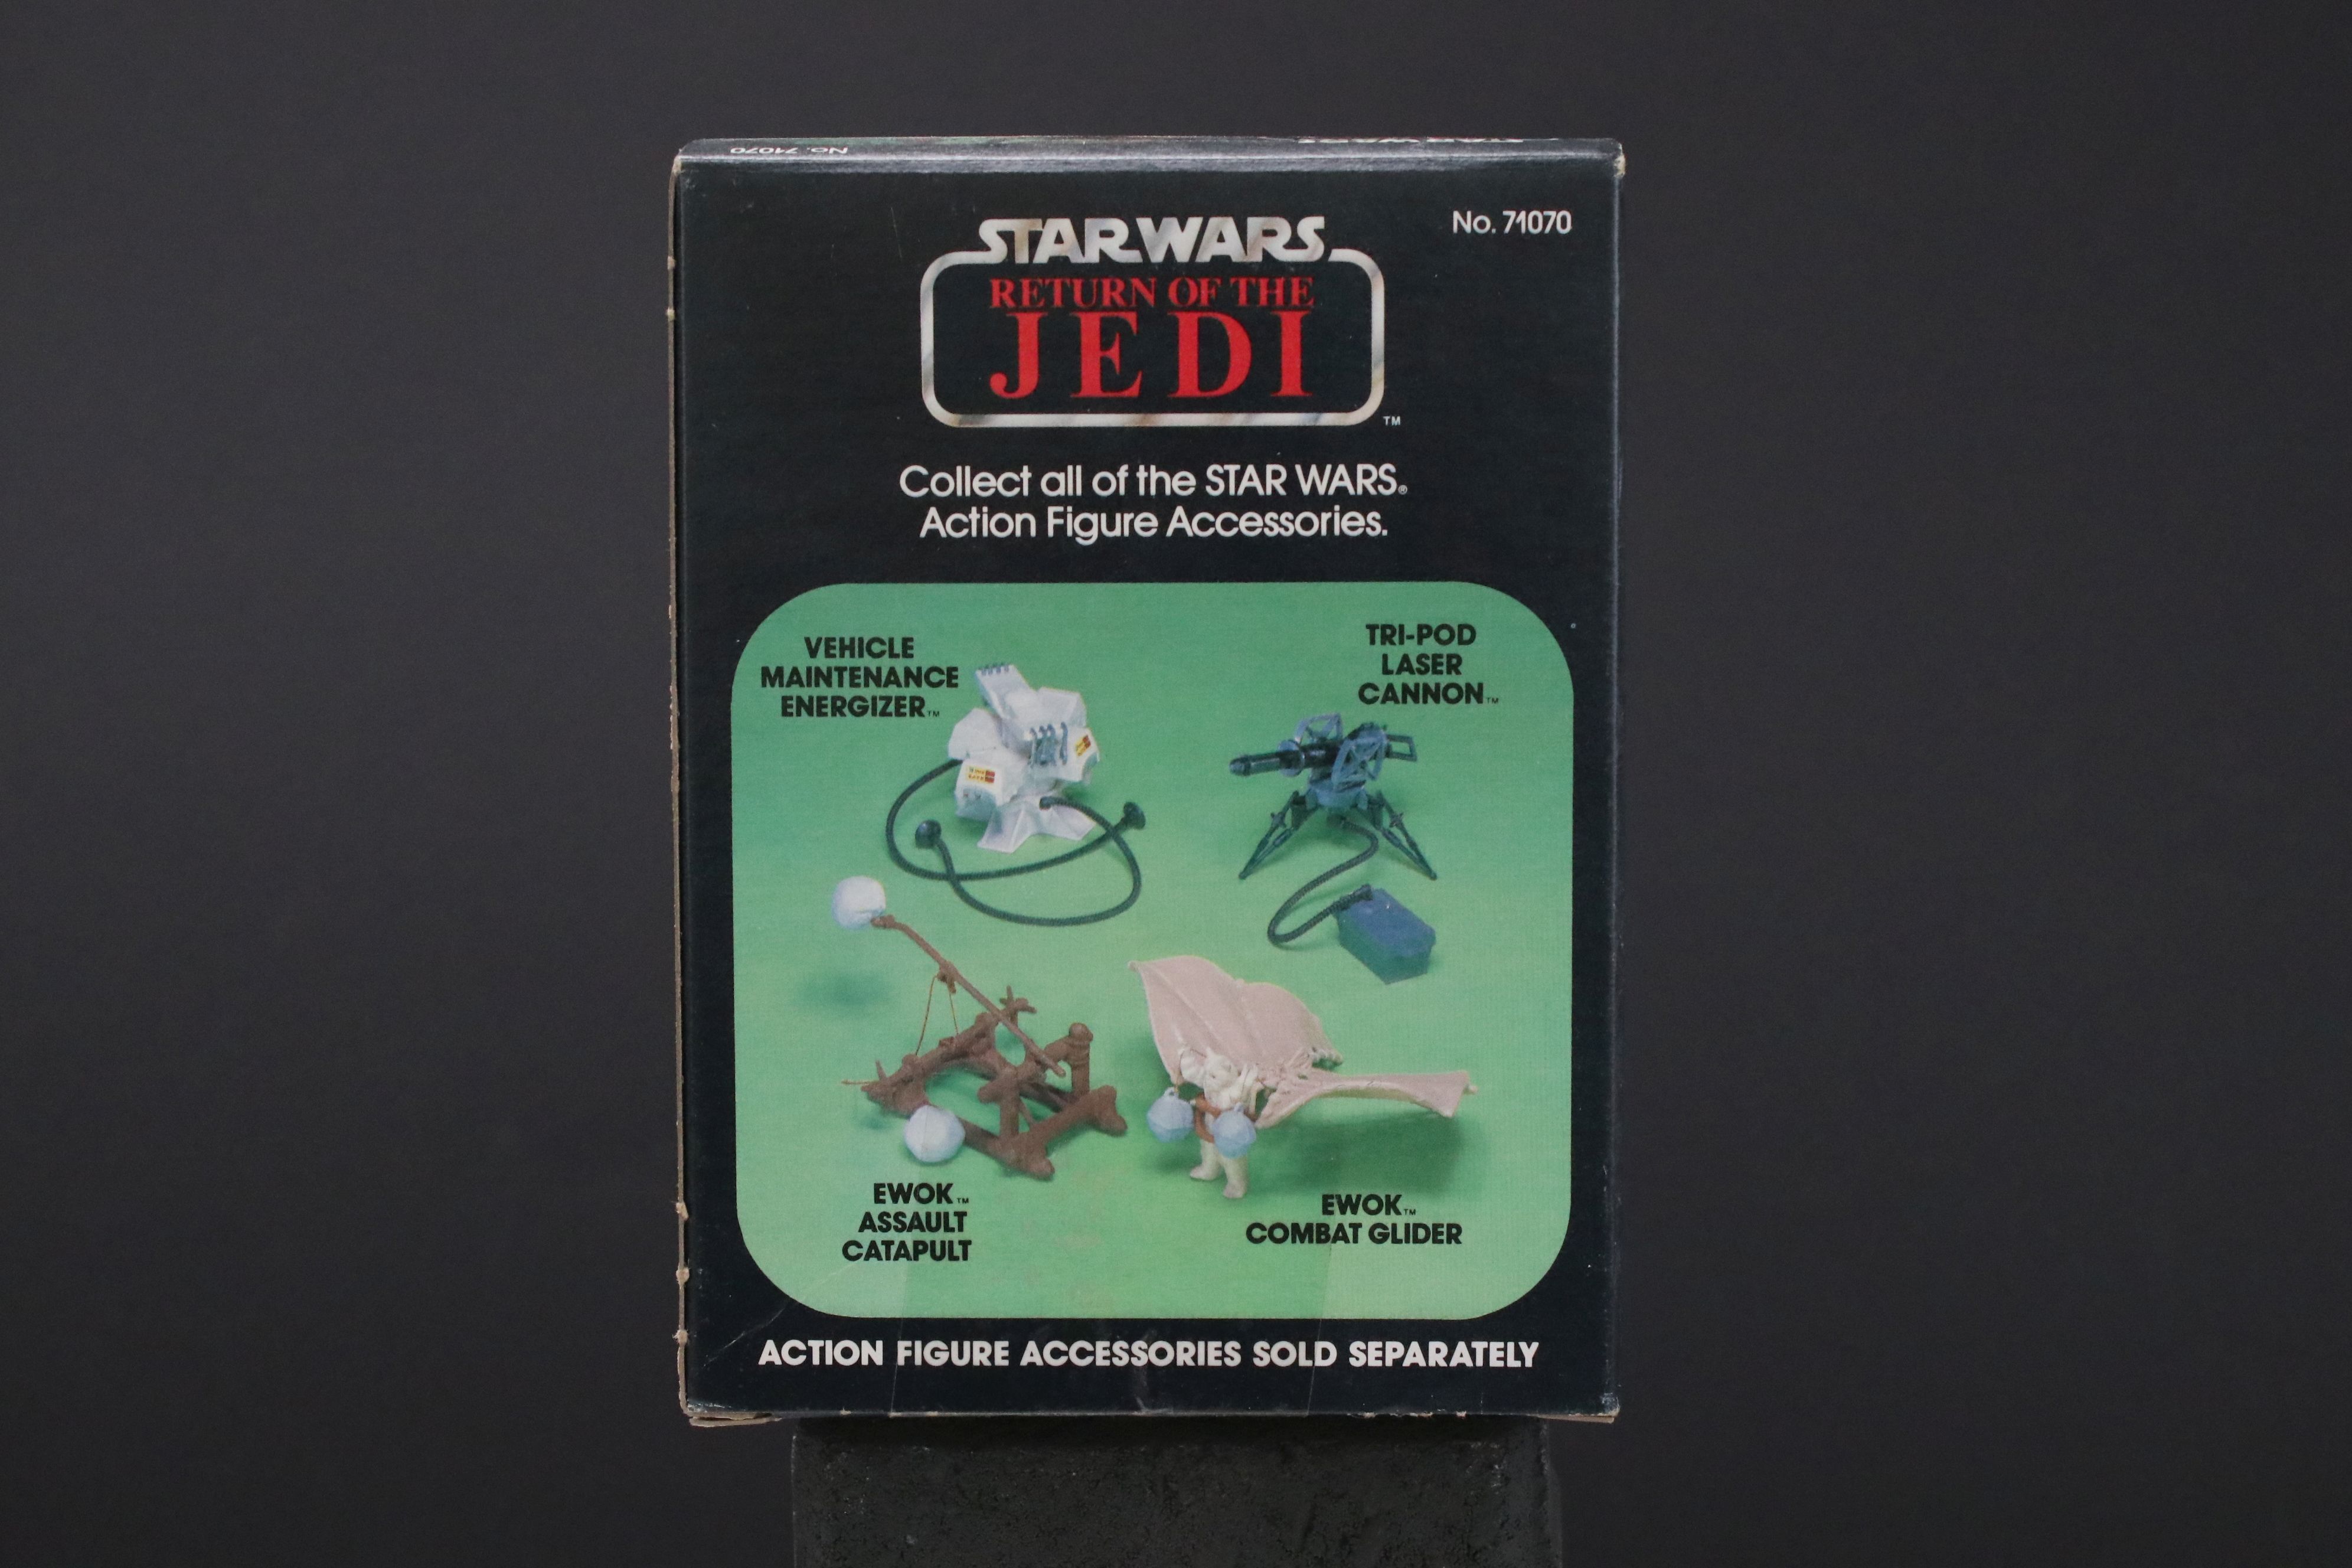 Star Wars - Boxed original Kenner Star Wars Return of the Jedi Ewok Assault Catapult accessory, - Image 3 of 7